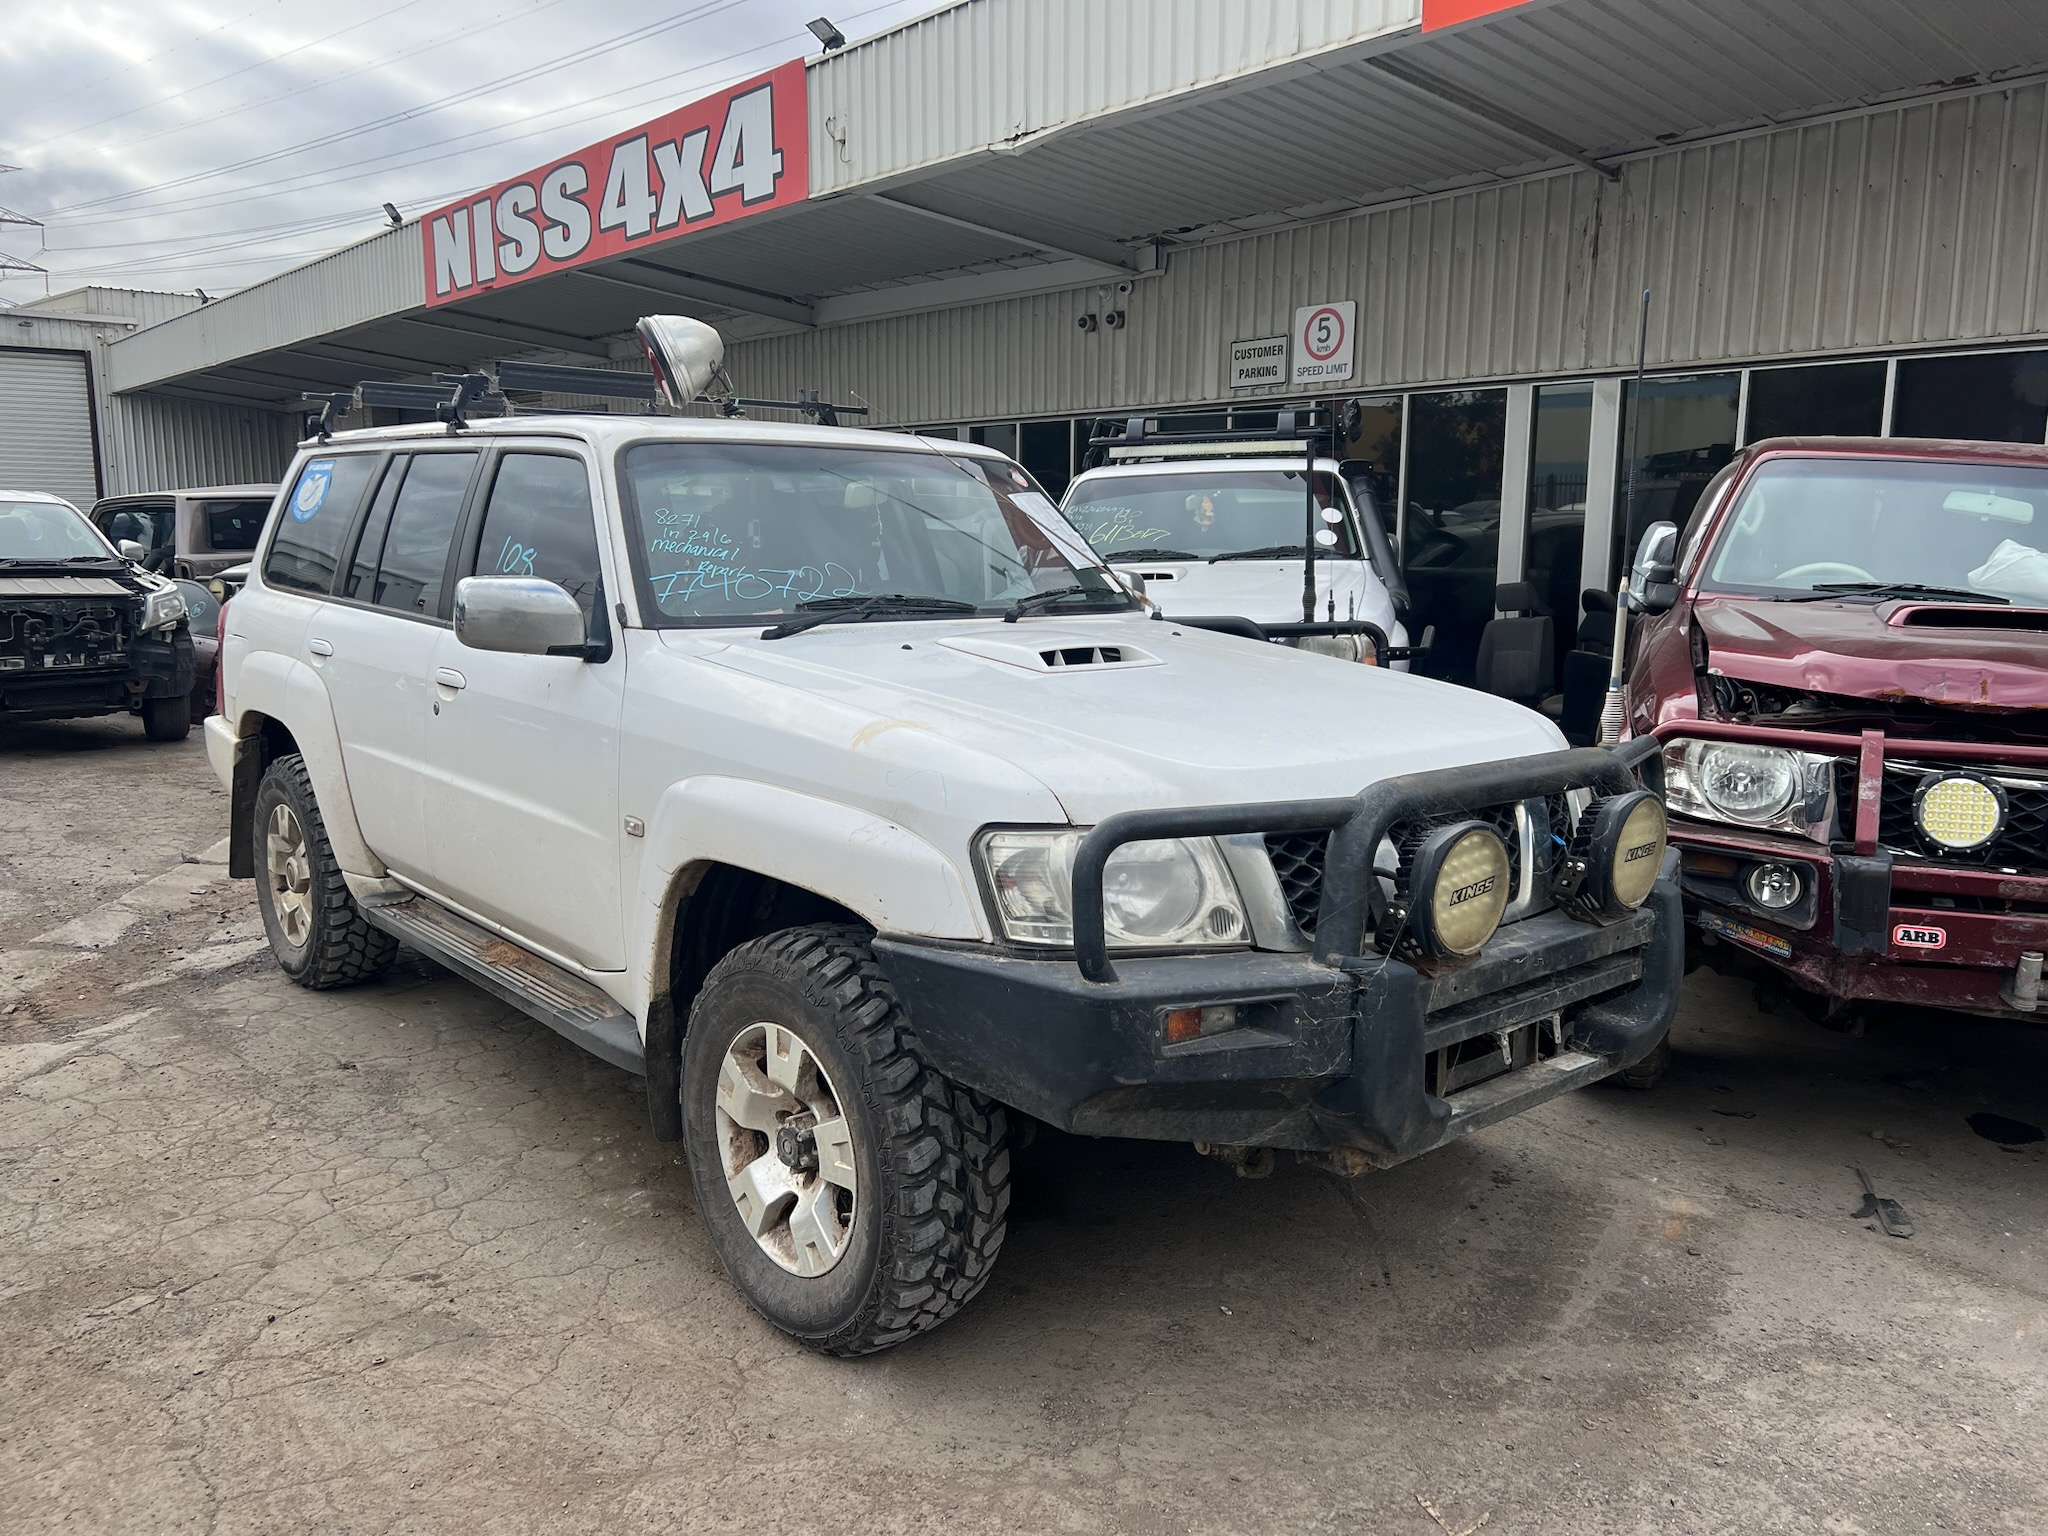 PARTING OUT NISSAN PATROL Y61 SERIES 4 ZD30 DIESEL WAGON WHITE 2008 WRECKING